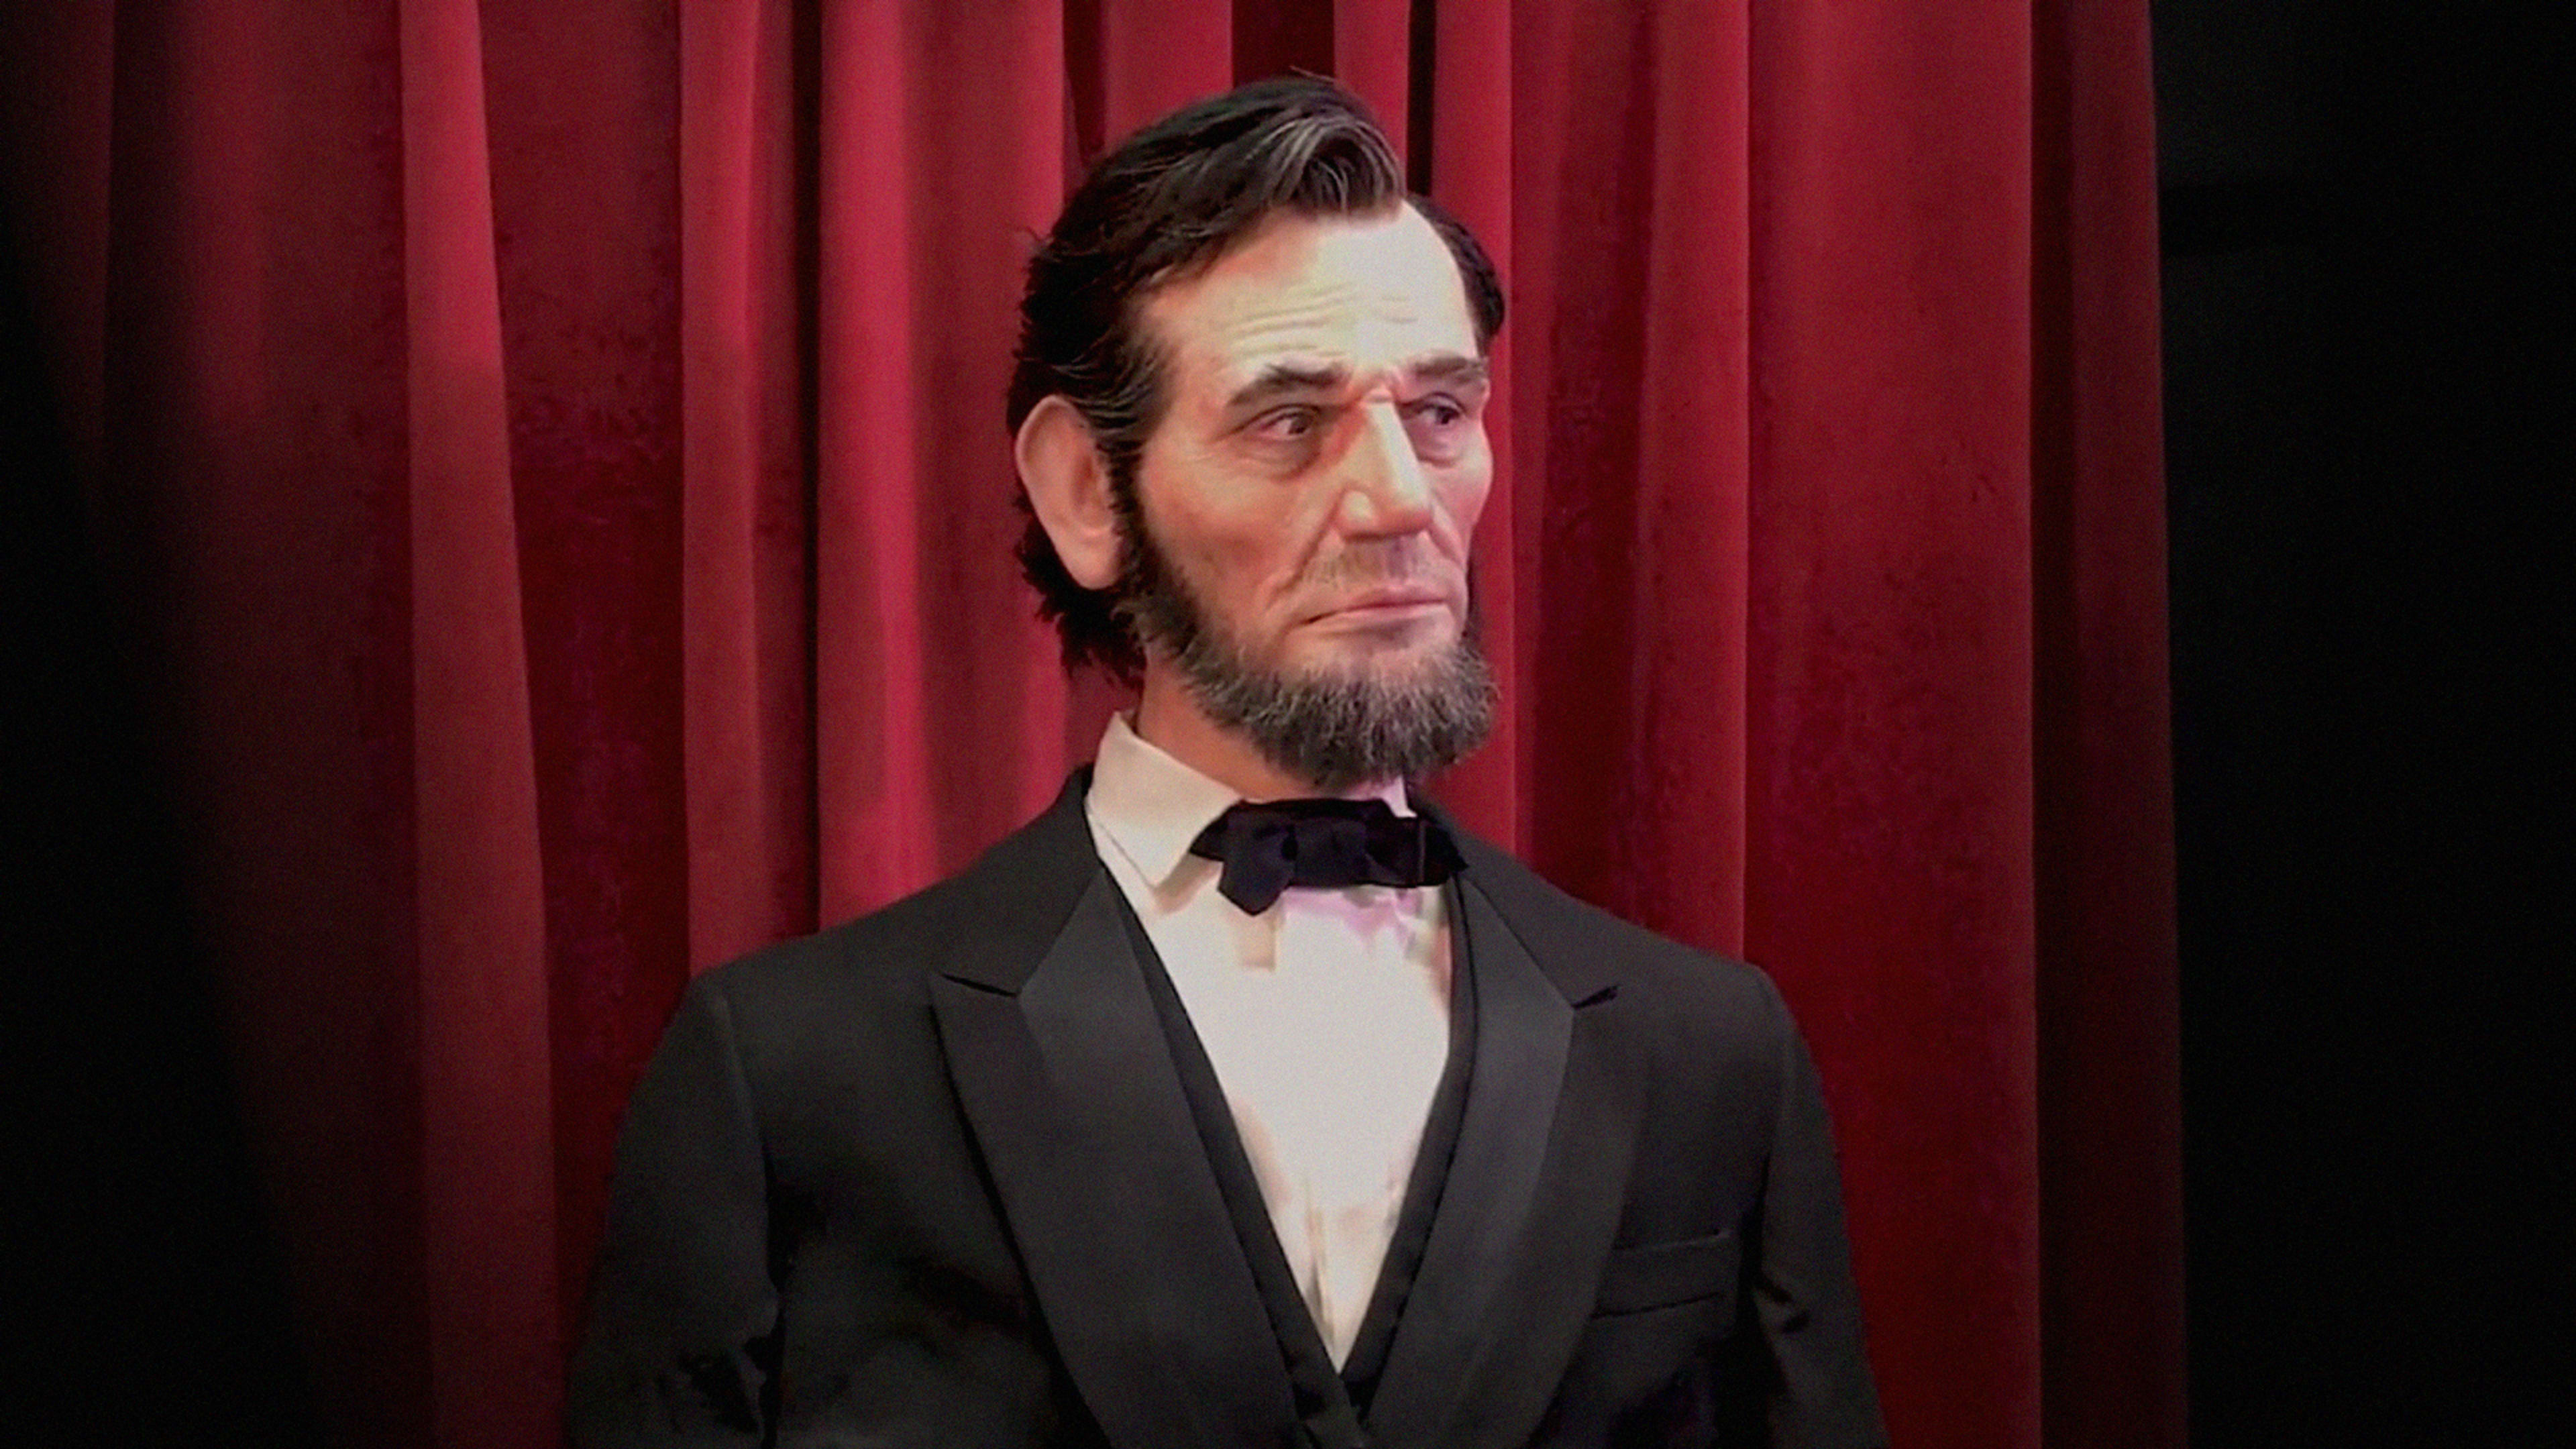 This Uncanny Robot Abraham Lincoln Got His Start As An Enemy Combatant